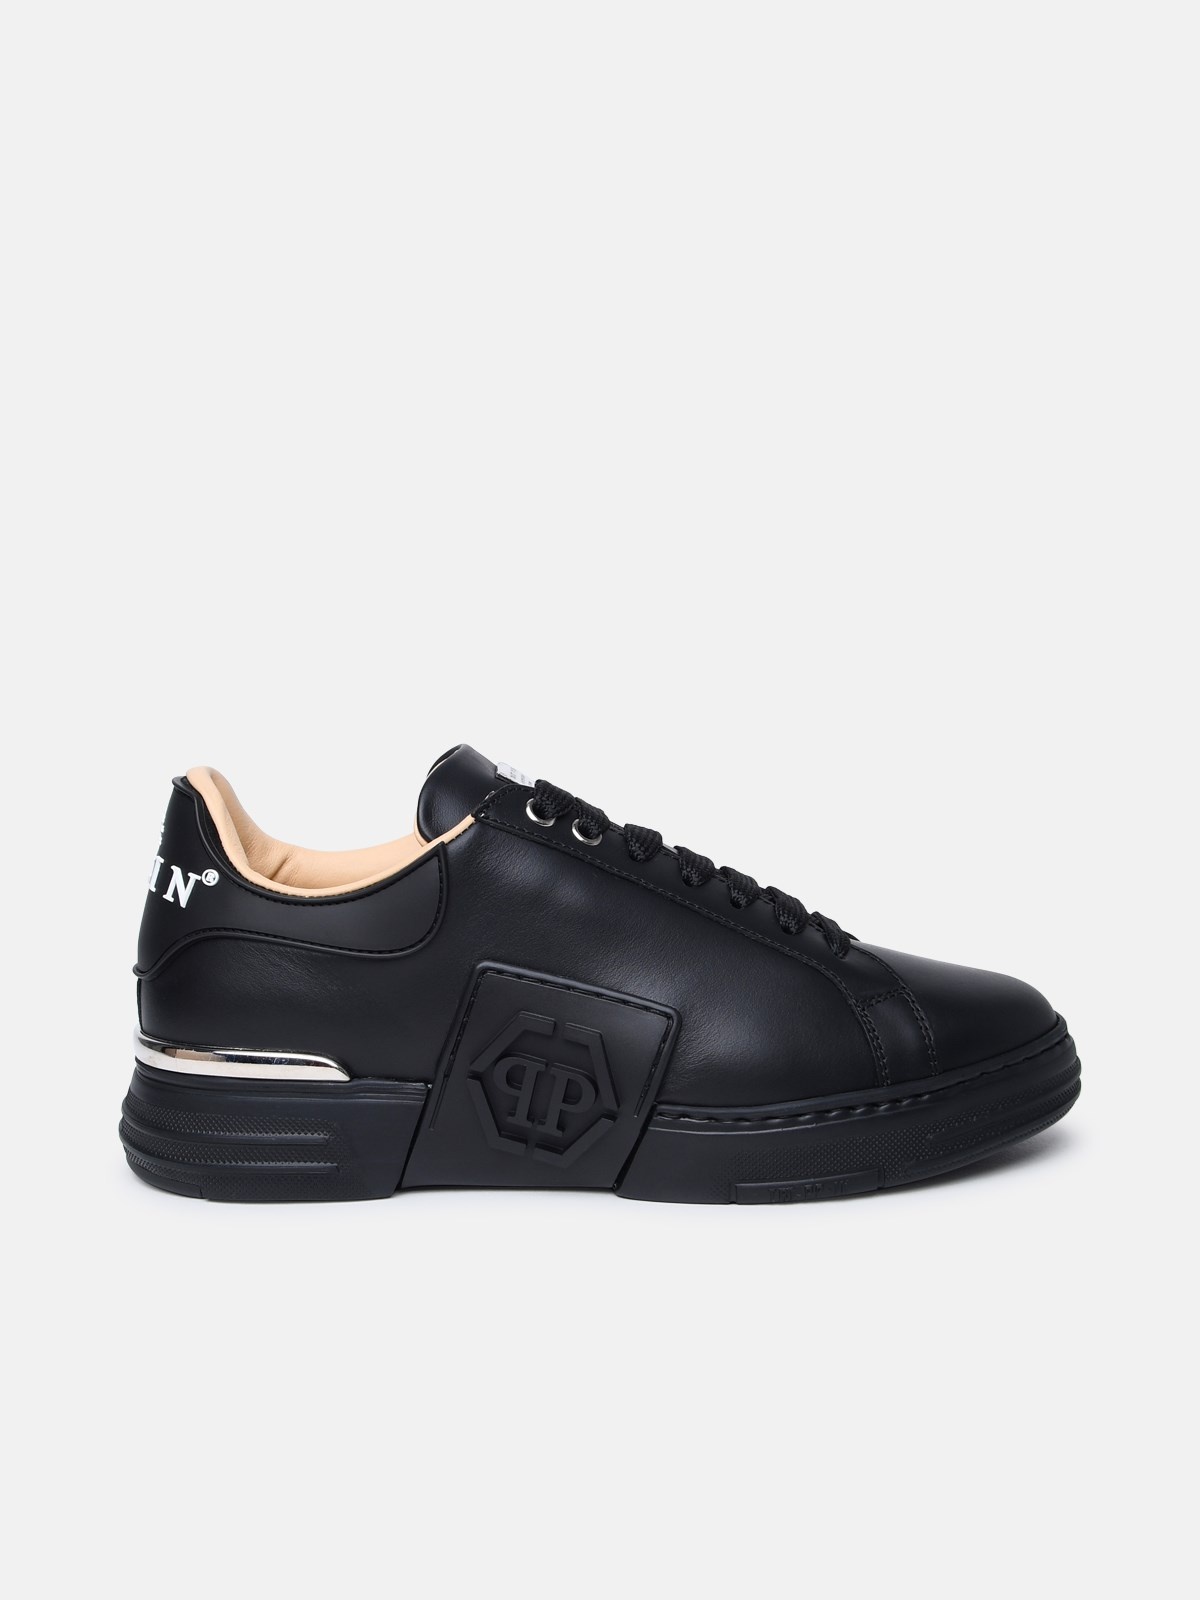 Exagon sneakers in black nappa leather - 1